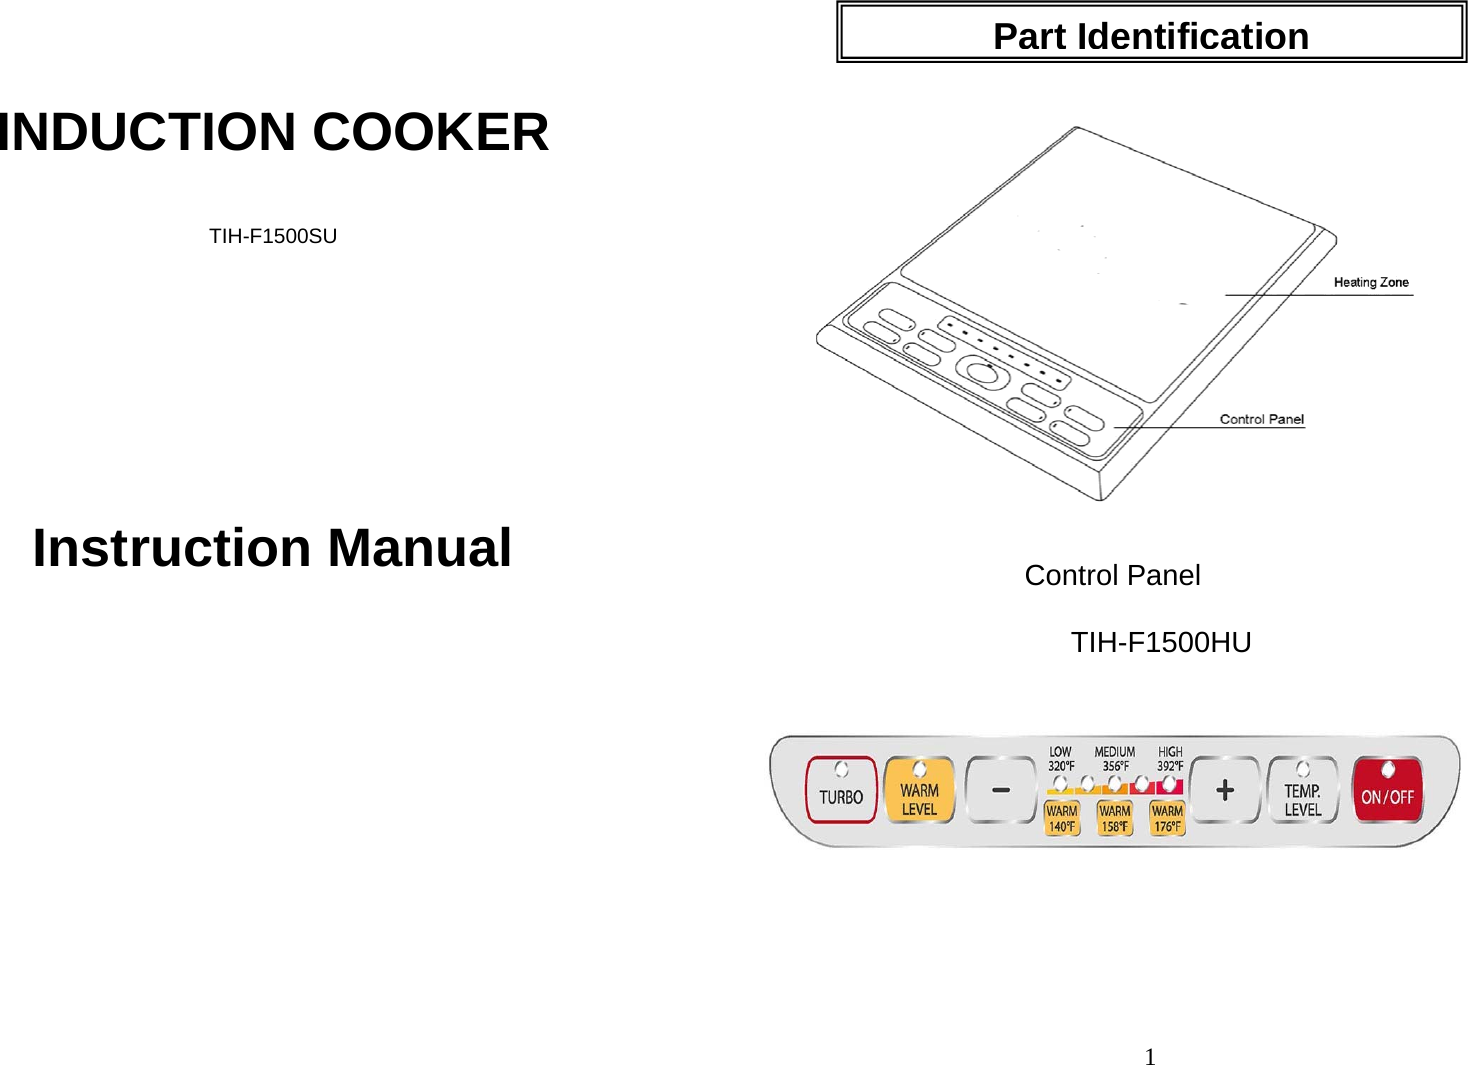     INDUCTION COOKER  TIH-F1500SU        Instruction Manual          1        Control Panel              TIH-F1500HU                 1Part Identification